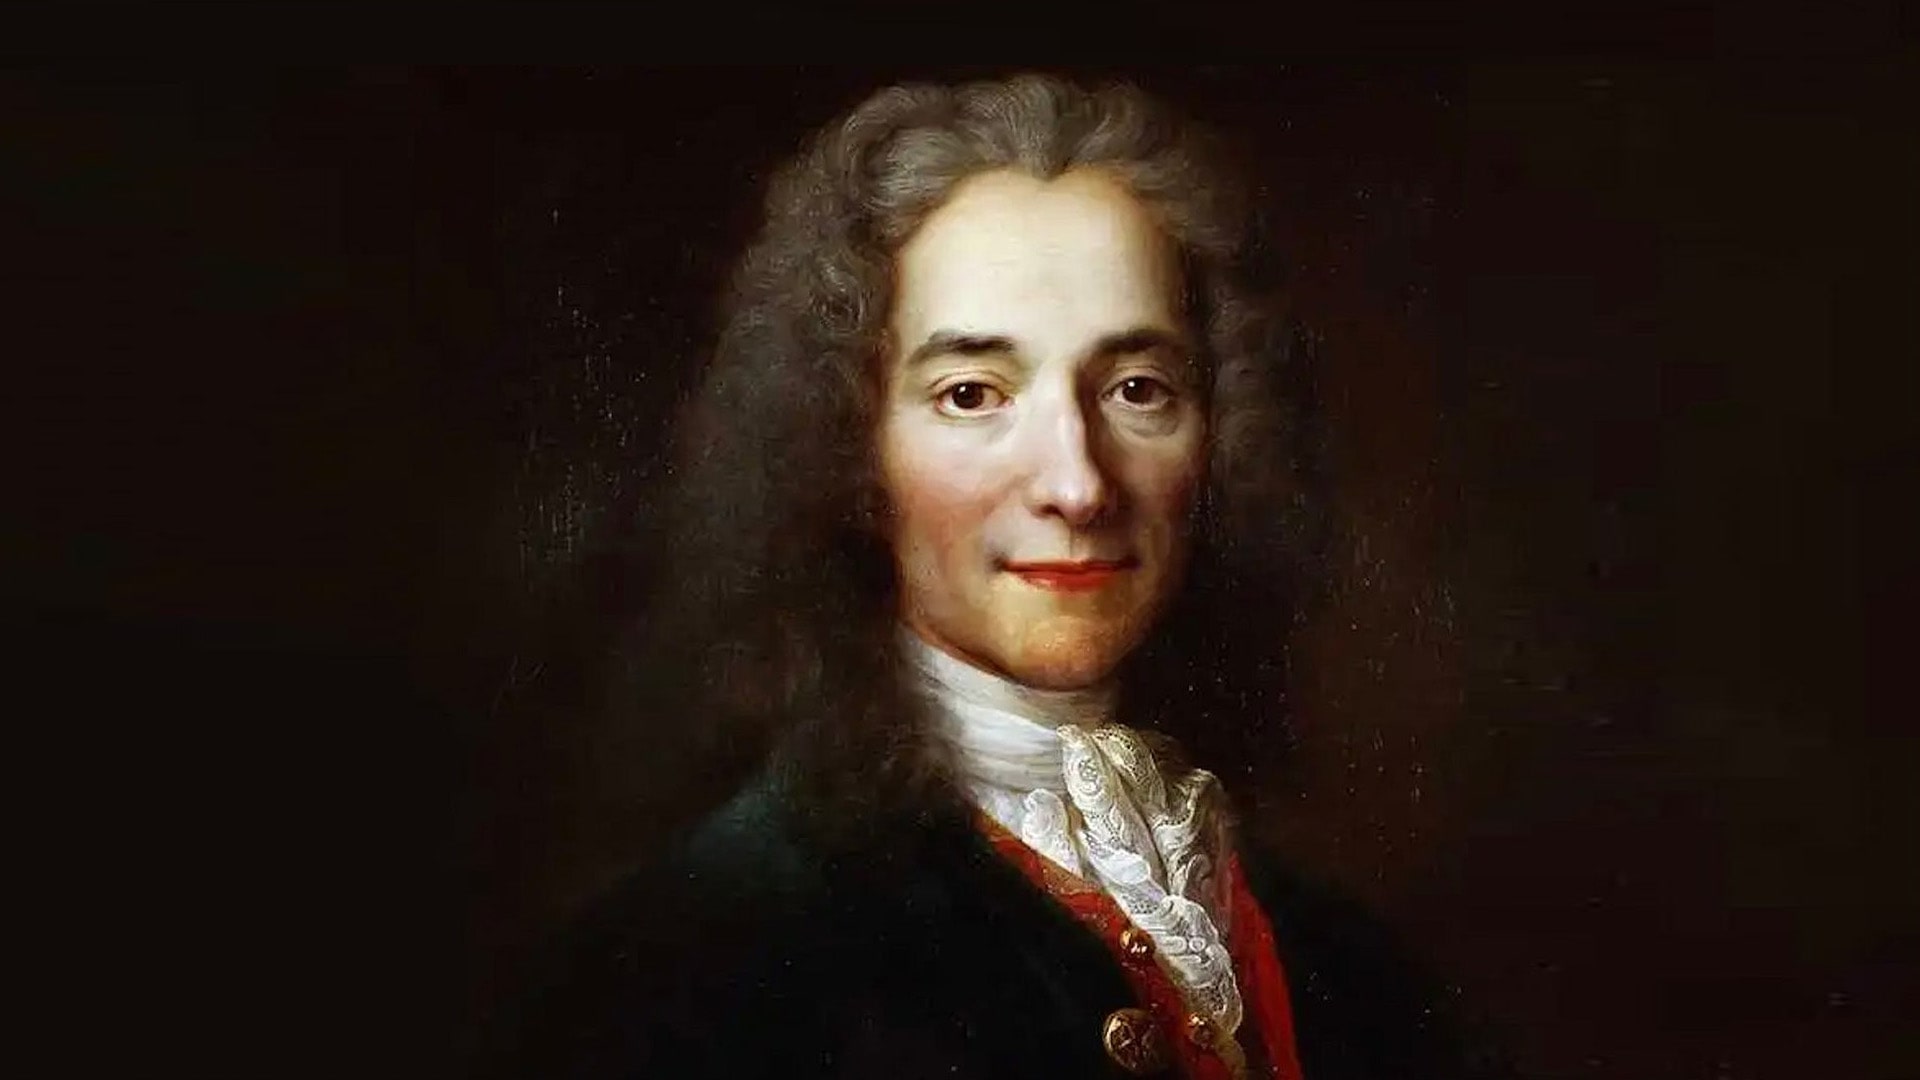 33 interesting facts about Voltaire